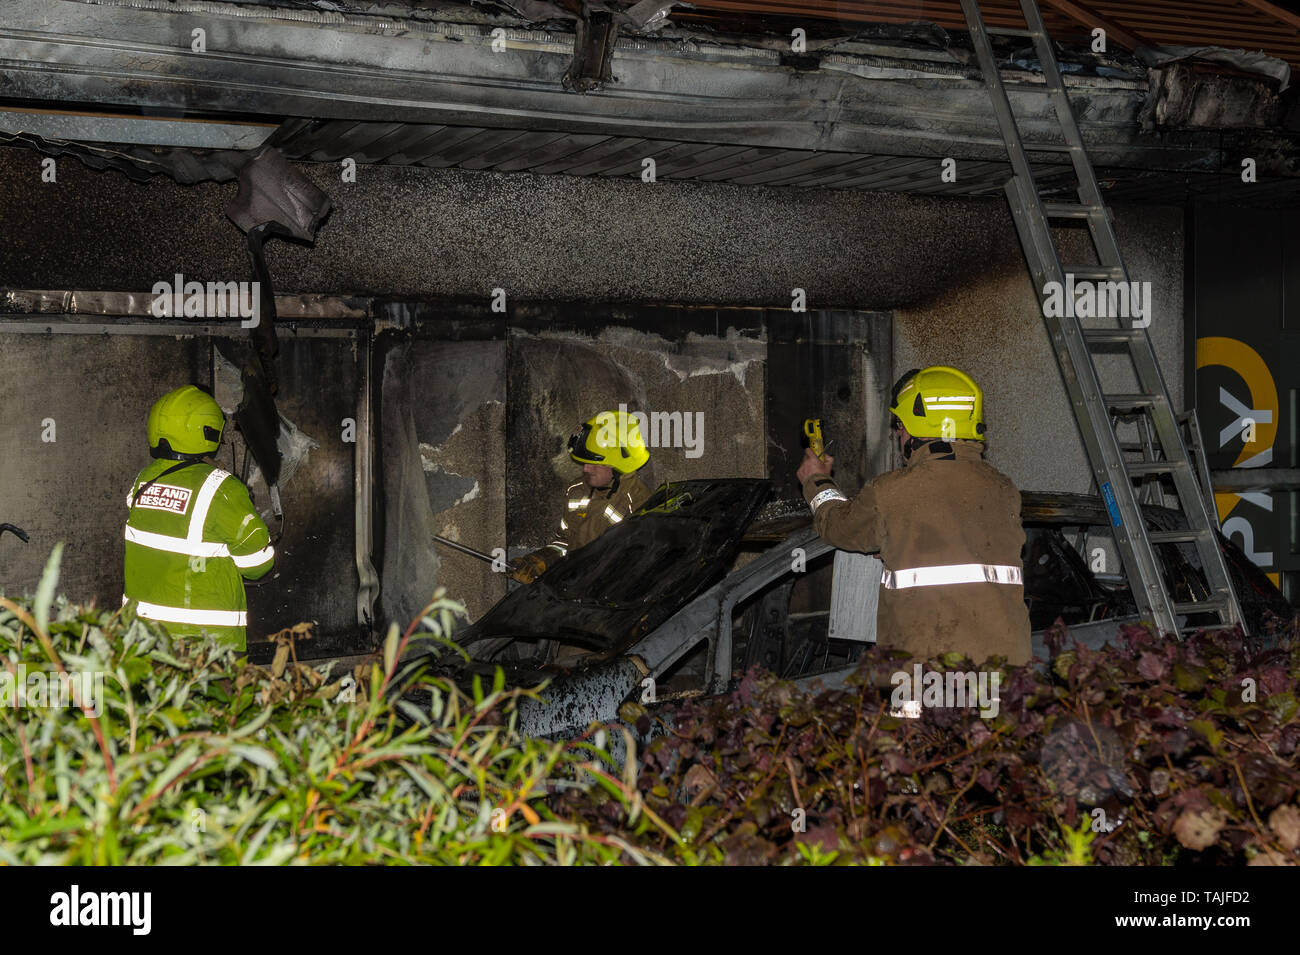 McDonalds Drive Thru, 2 Linkwood Place, Elgin, Moray, UK. 25th May, 2019. IV30 1HZ. On Saturday night a Fiat Car went on fire within the Drive Thru Part of Elgin's McDonald Restaurant. The car was totally destroyed and there was severe damage to the restaurant exterior. Credit: JASPERIMAGE/Alamy Live News Stock Photo